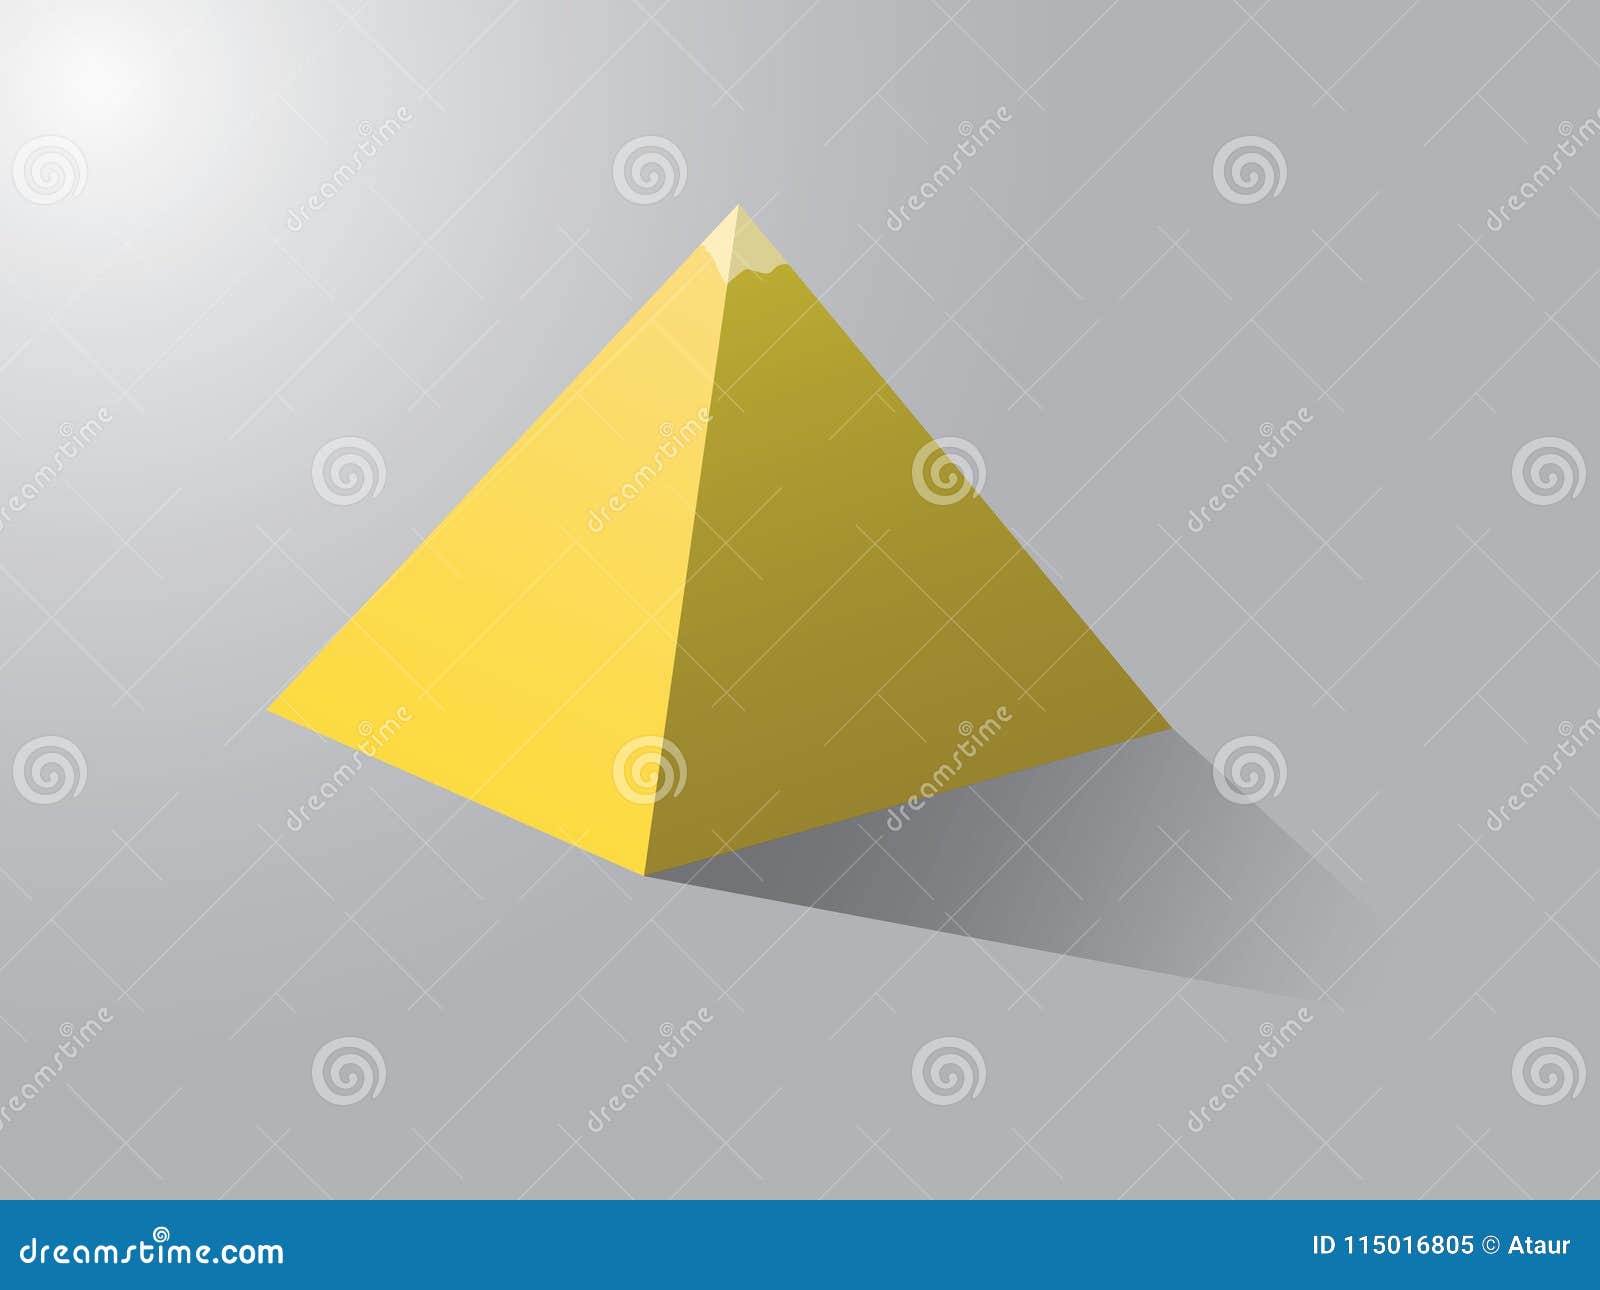 Cool Golden Pyramid of Cairo in Desert on Foggy Weather Stock Vector ...